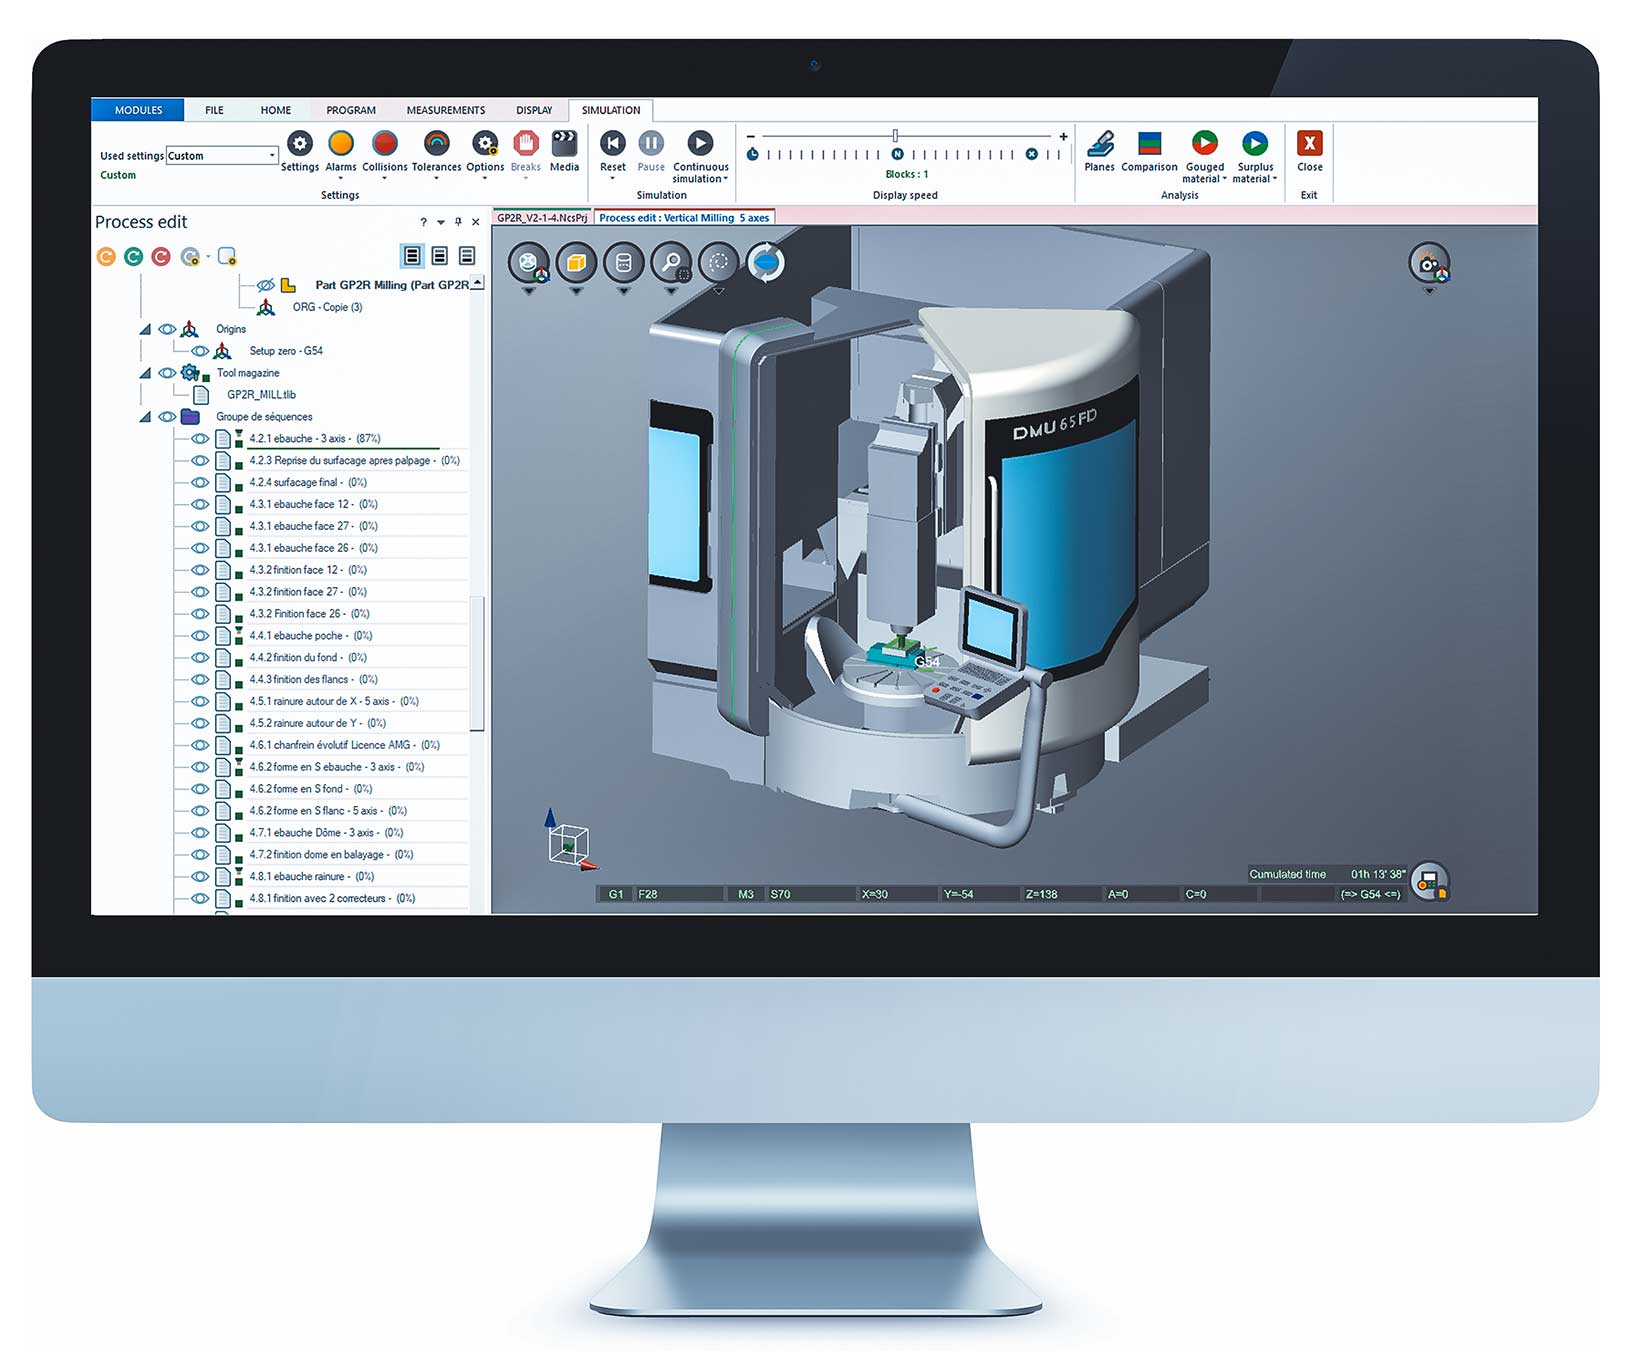 Validation of a WORKNC CAD CAM program in NCSIMUL CNC simulation software